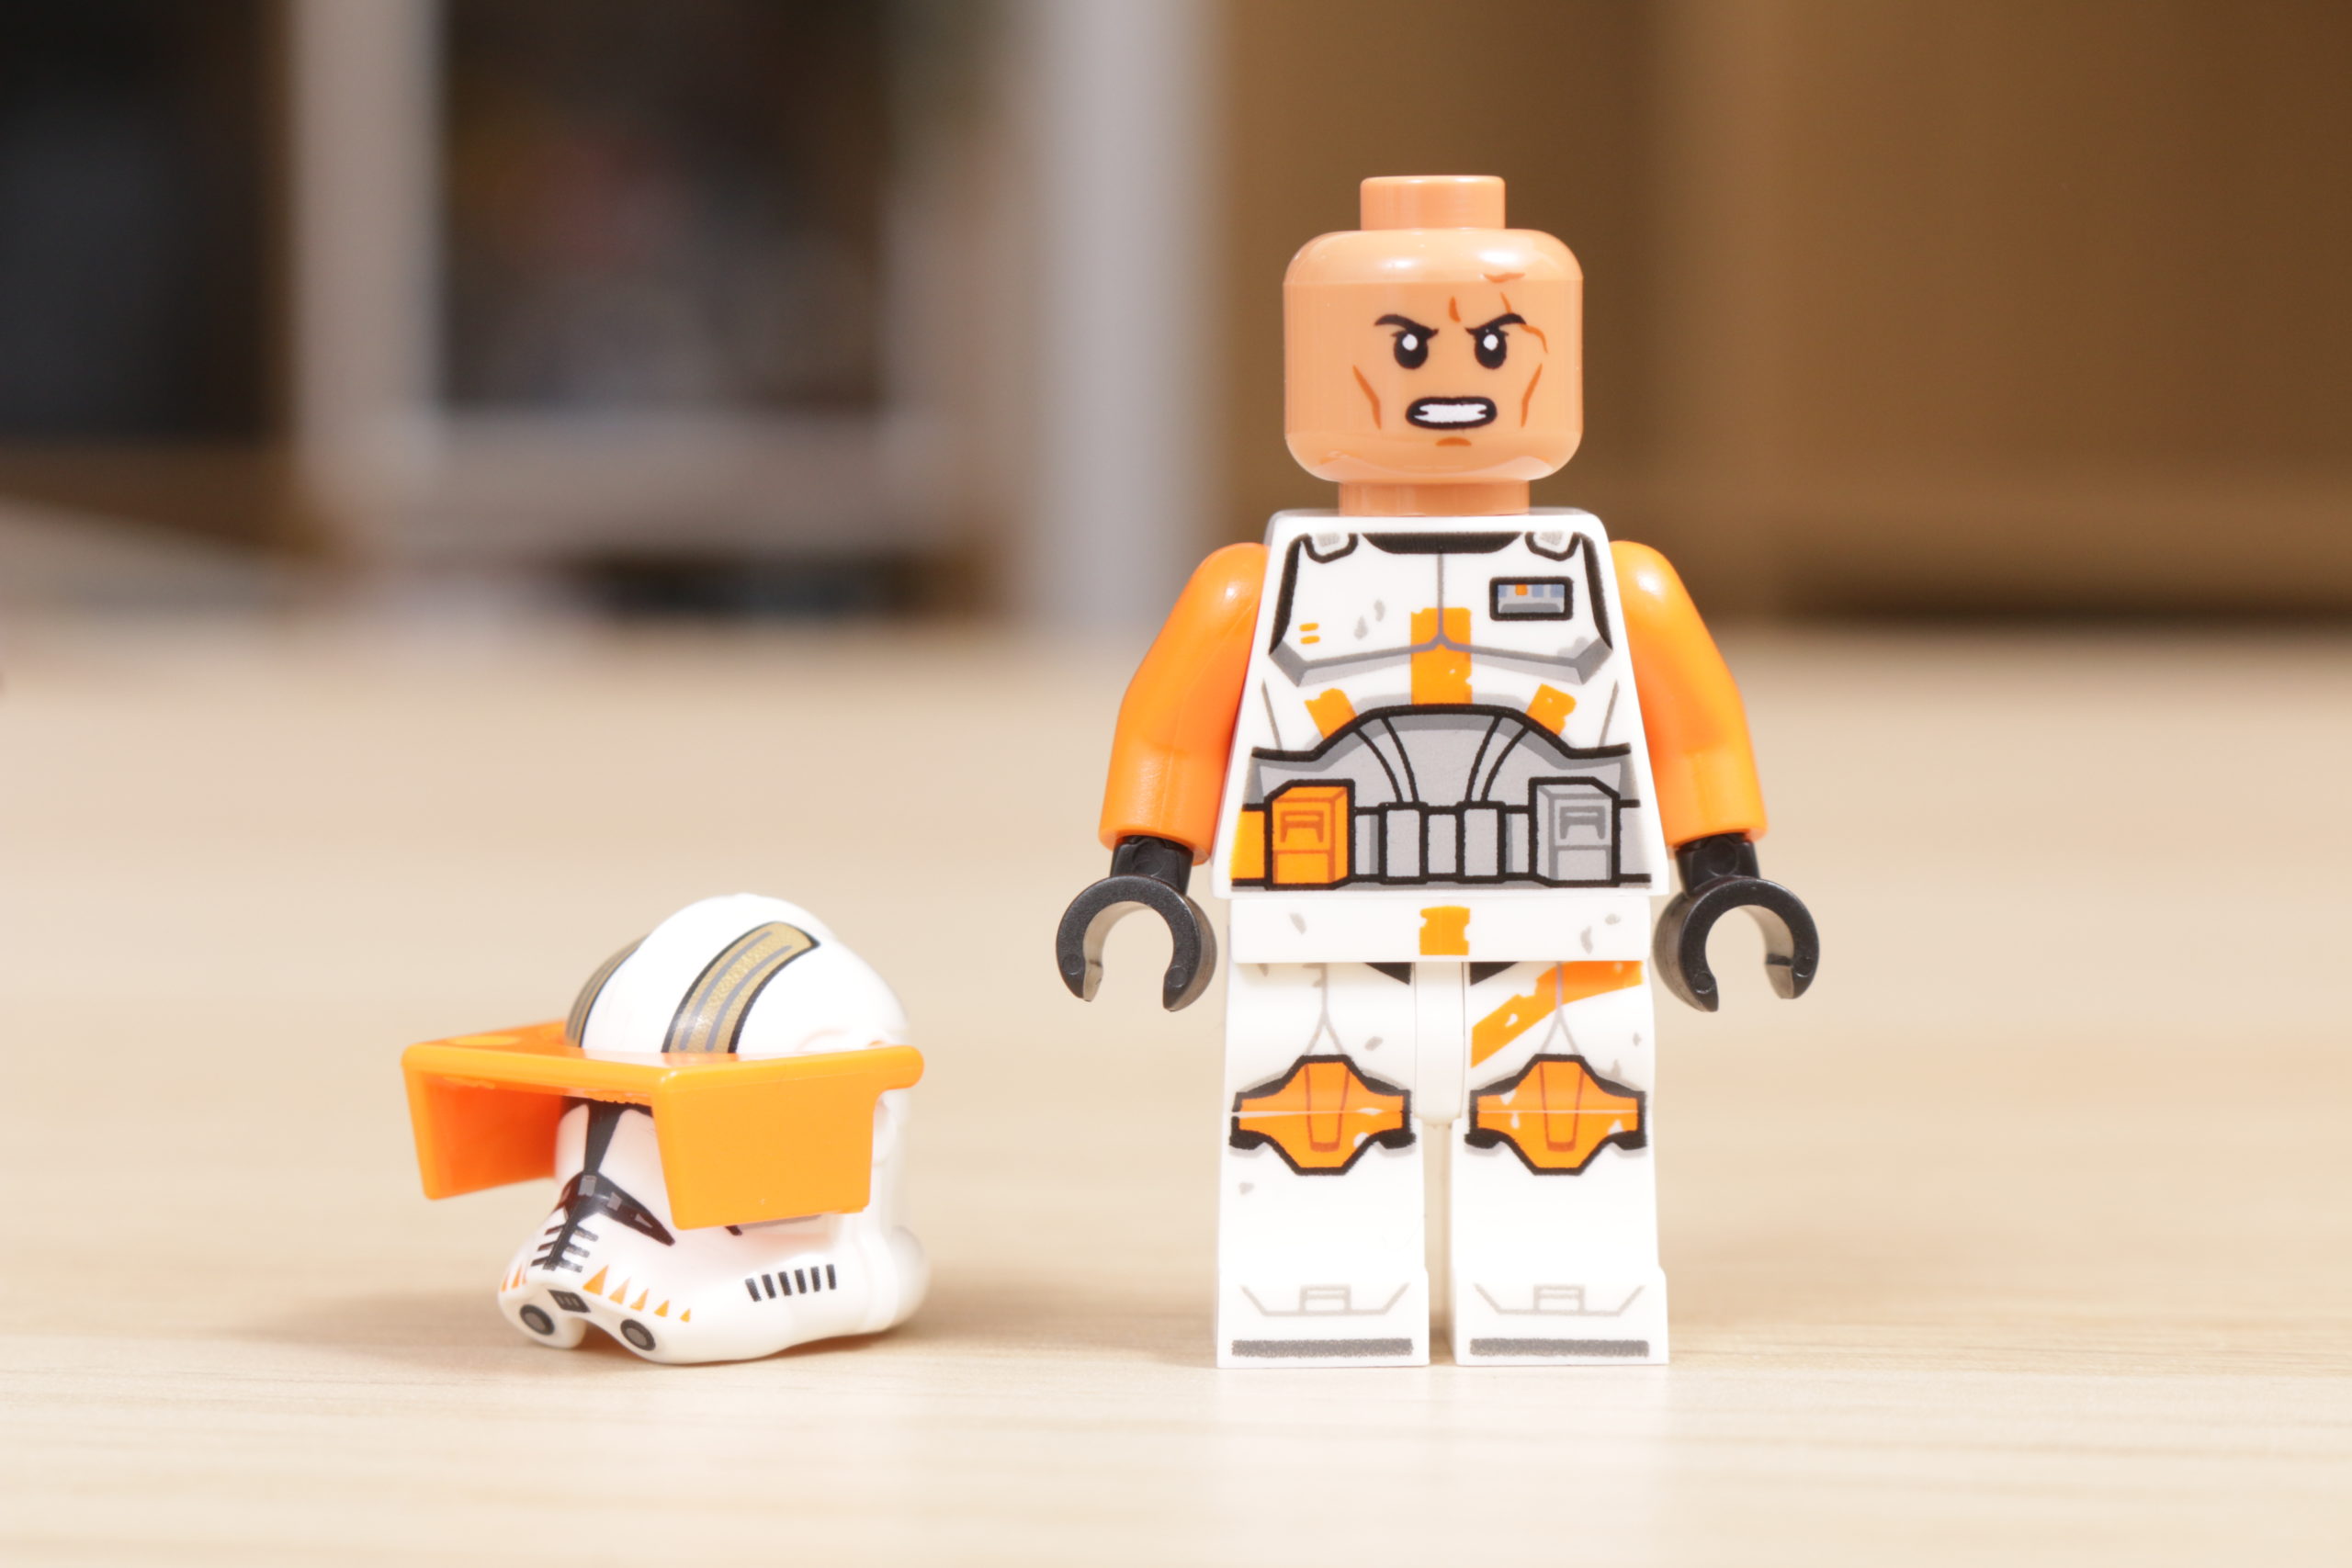 New LEGO Star Wars Commander Cody pays homage to past clone minifigures – Brick Fanatics – LEGO News, Reviews and